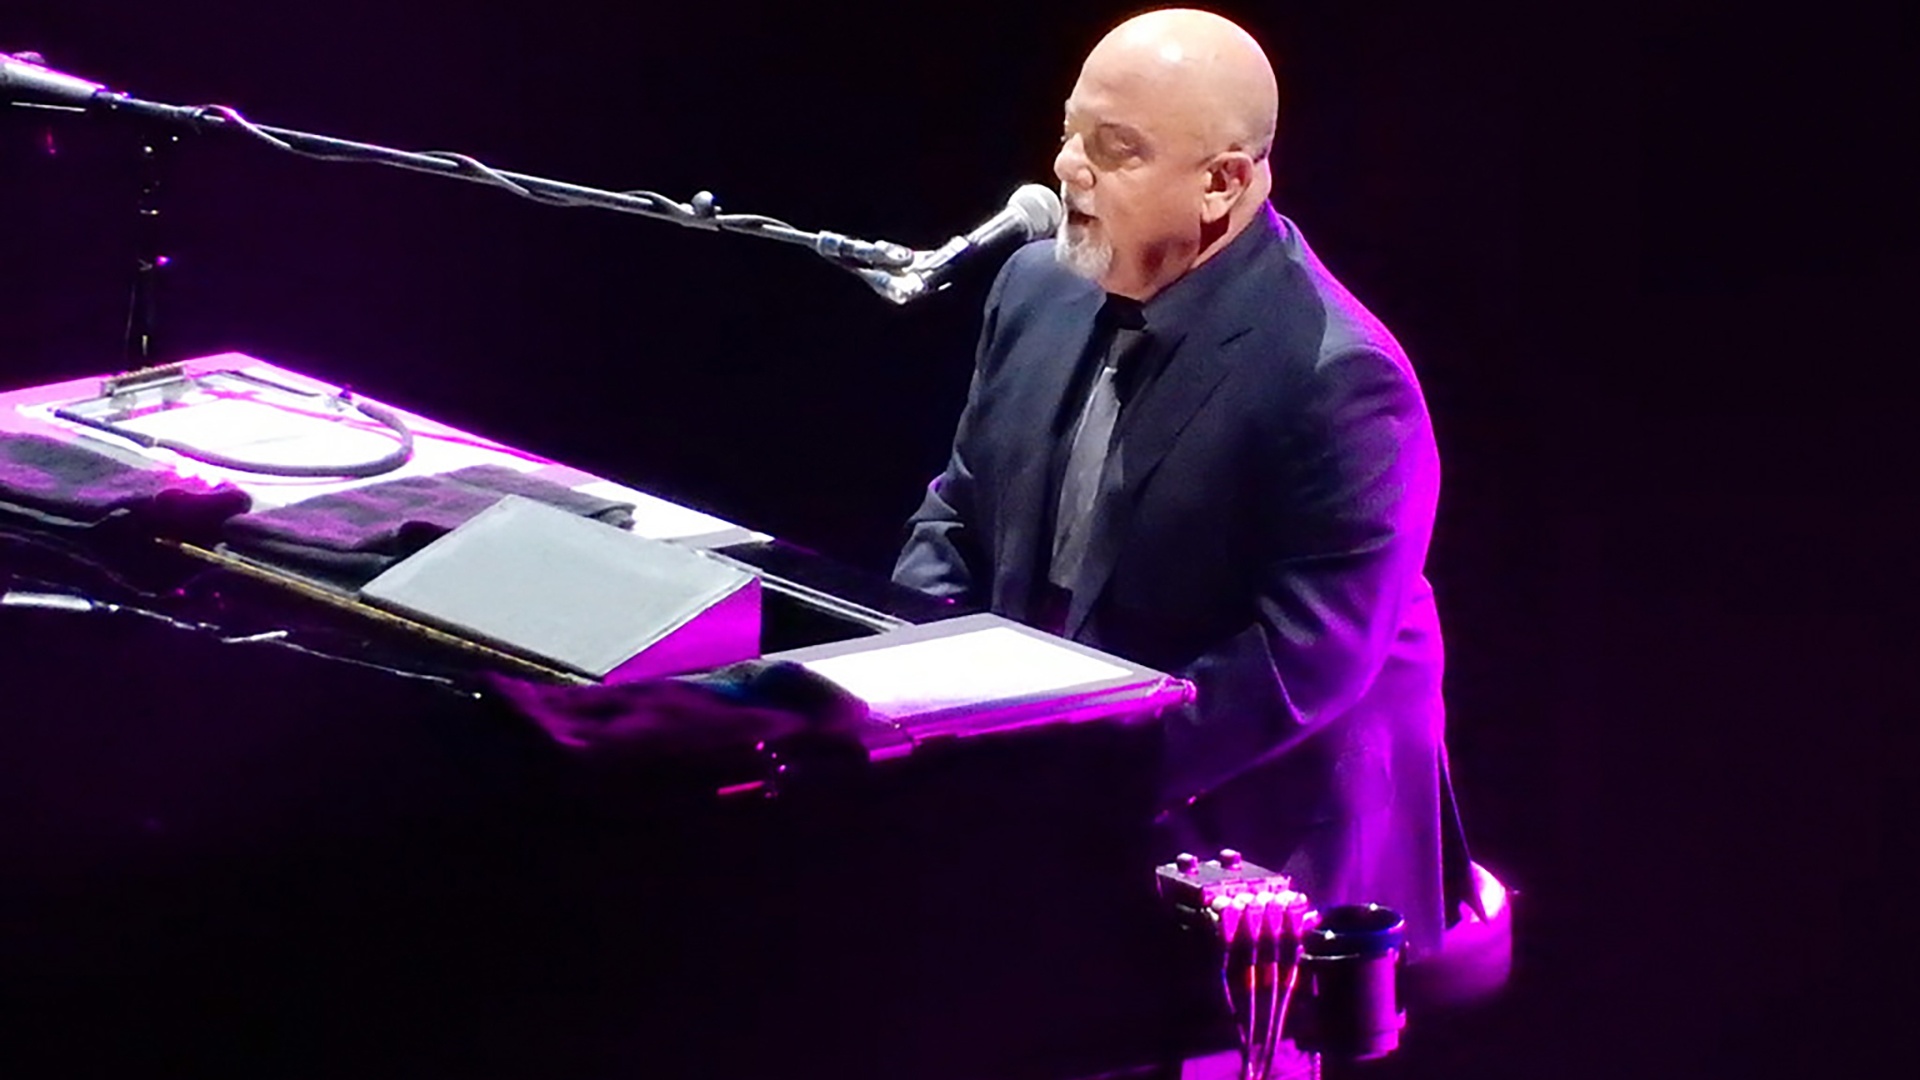 Billy Joel’s Merchandise Protected from Counterfeiters